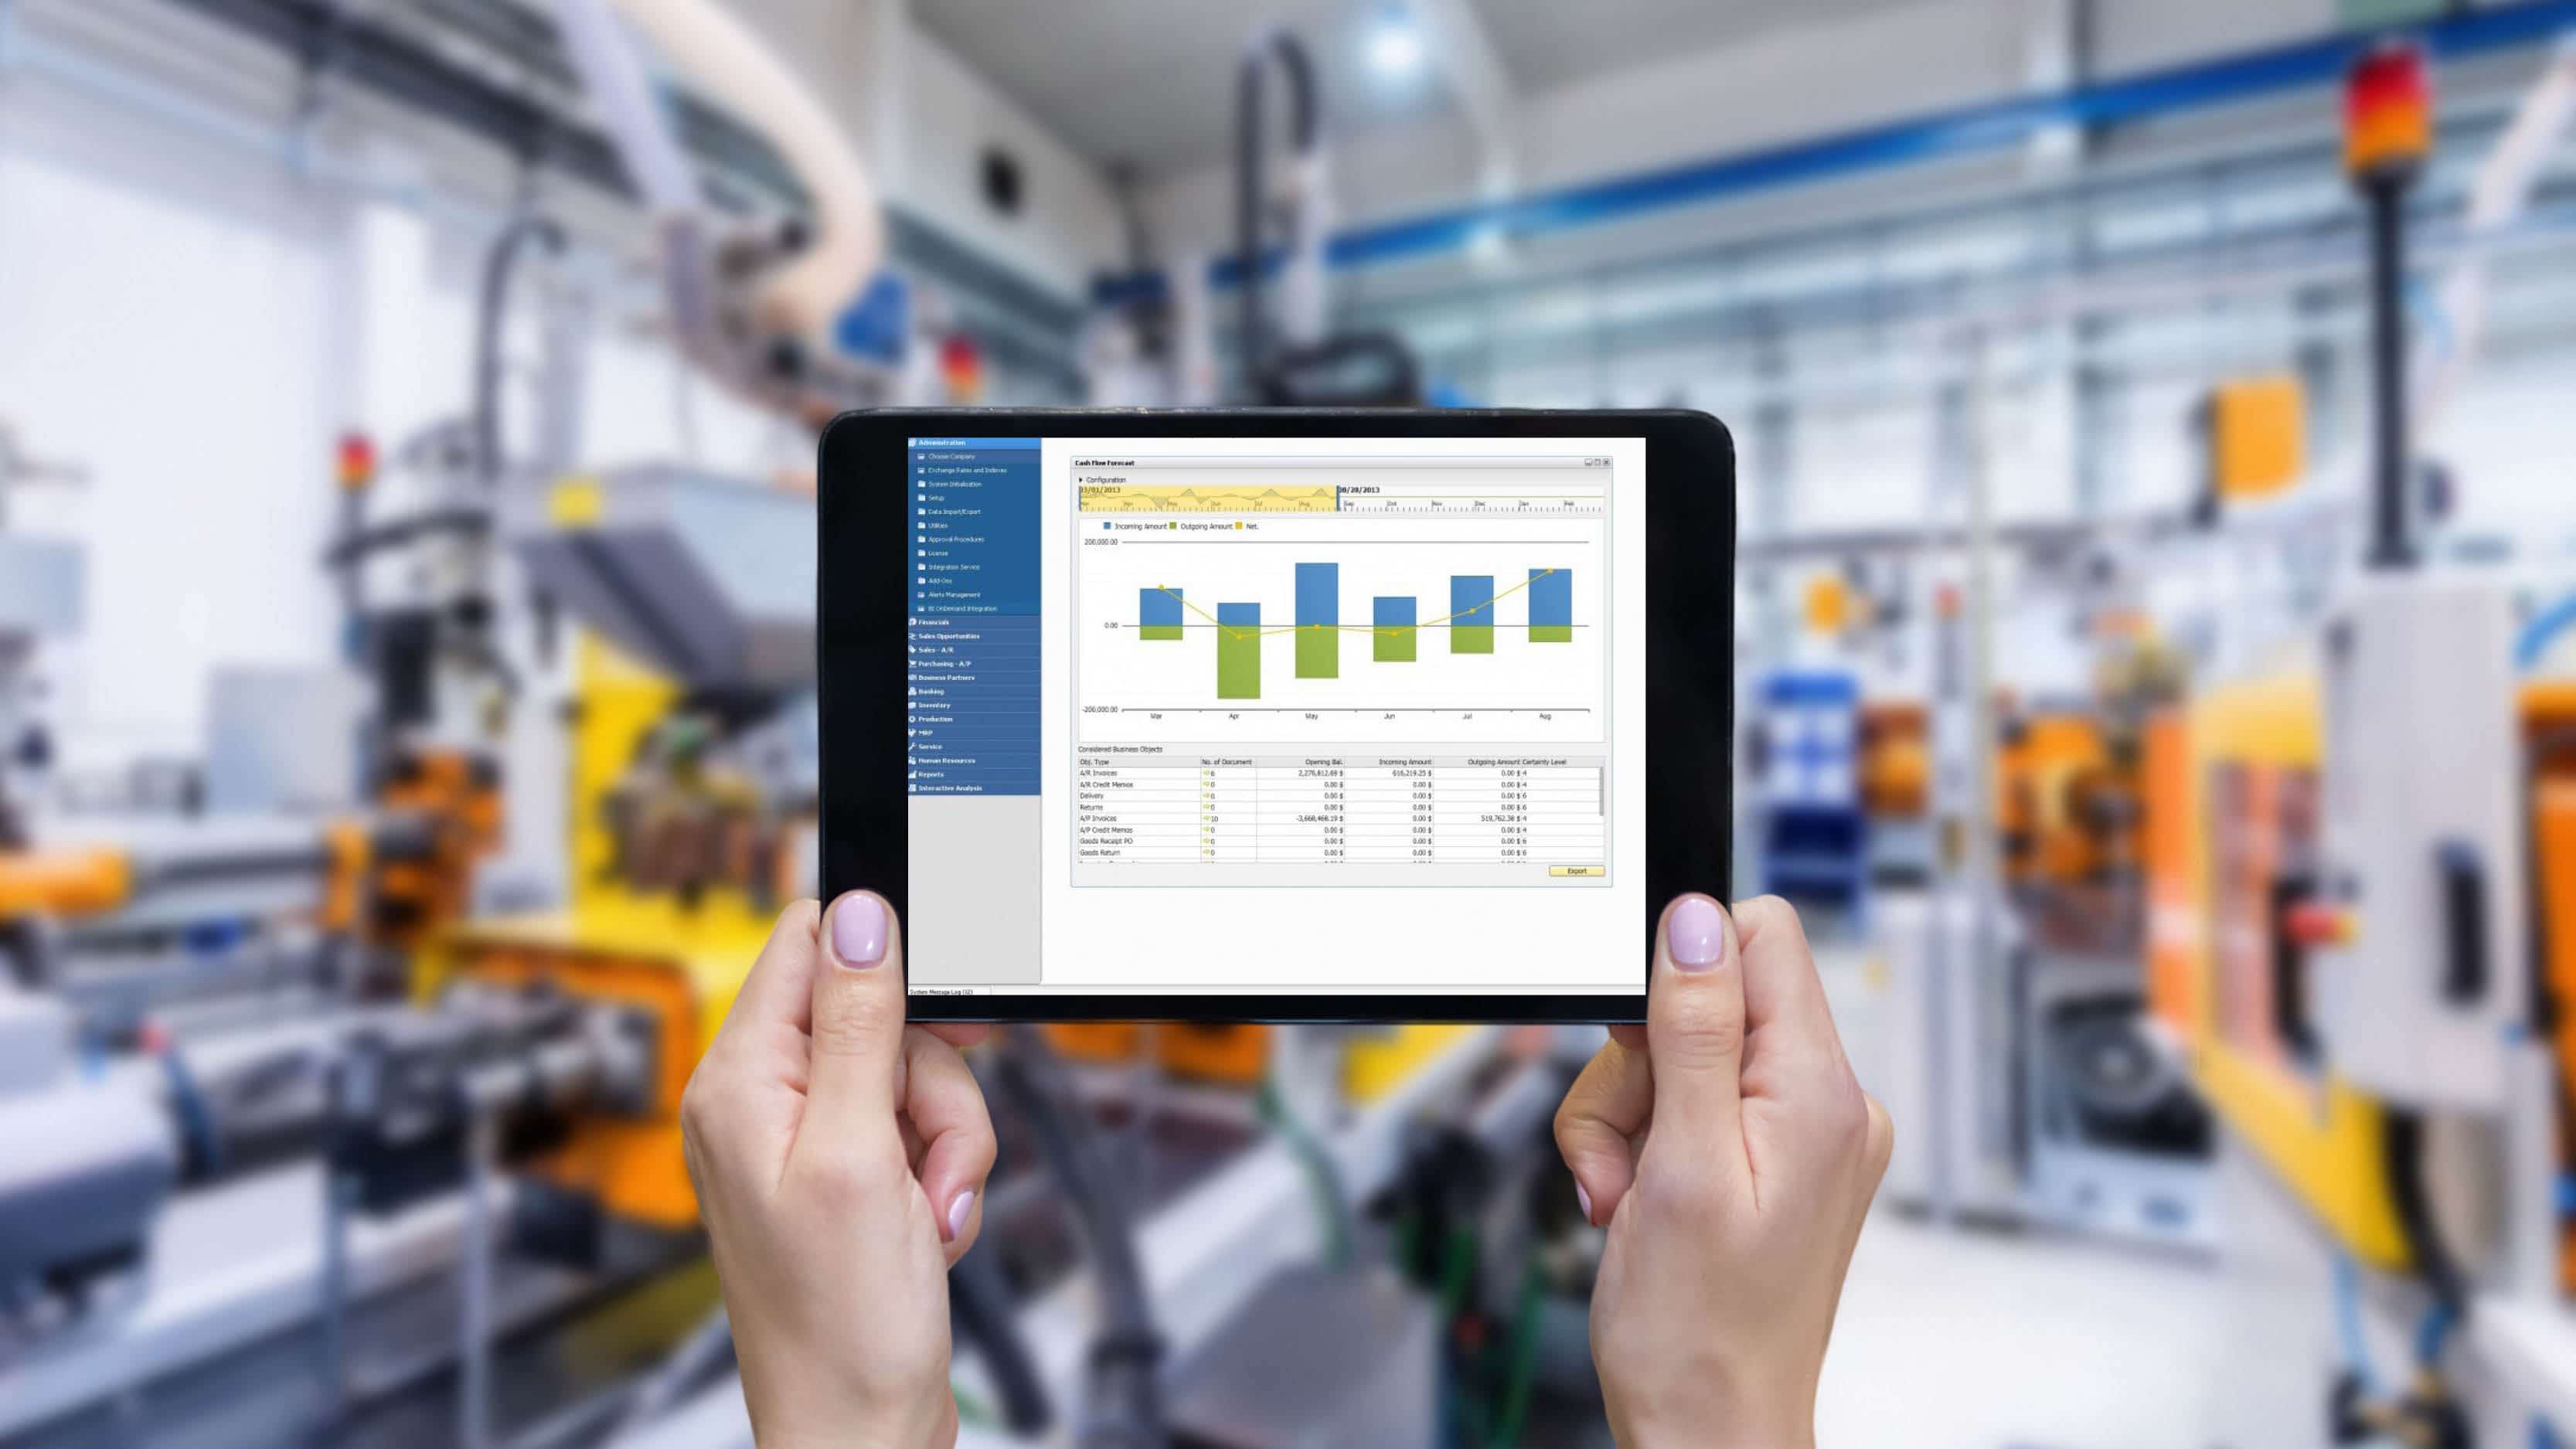 SAP Business One for manufacturing business - a complete list from A to Z